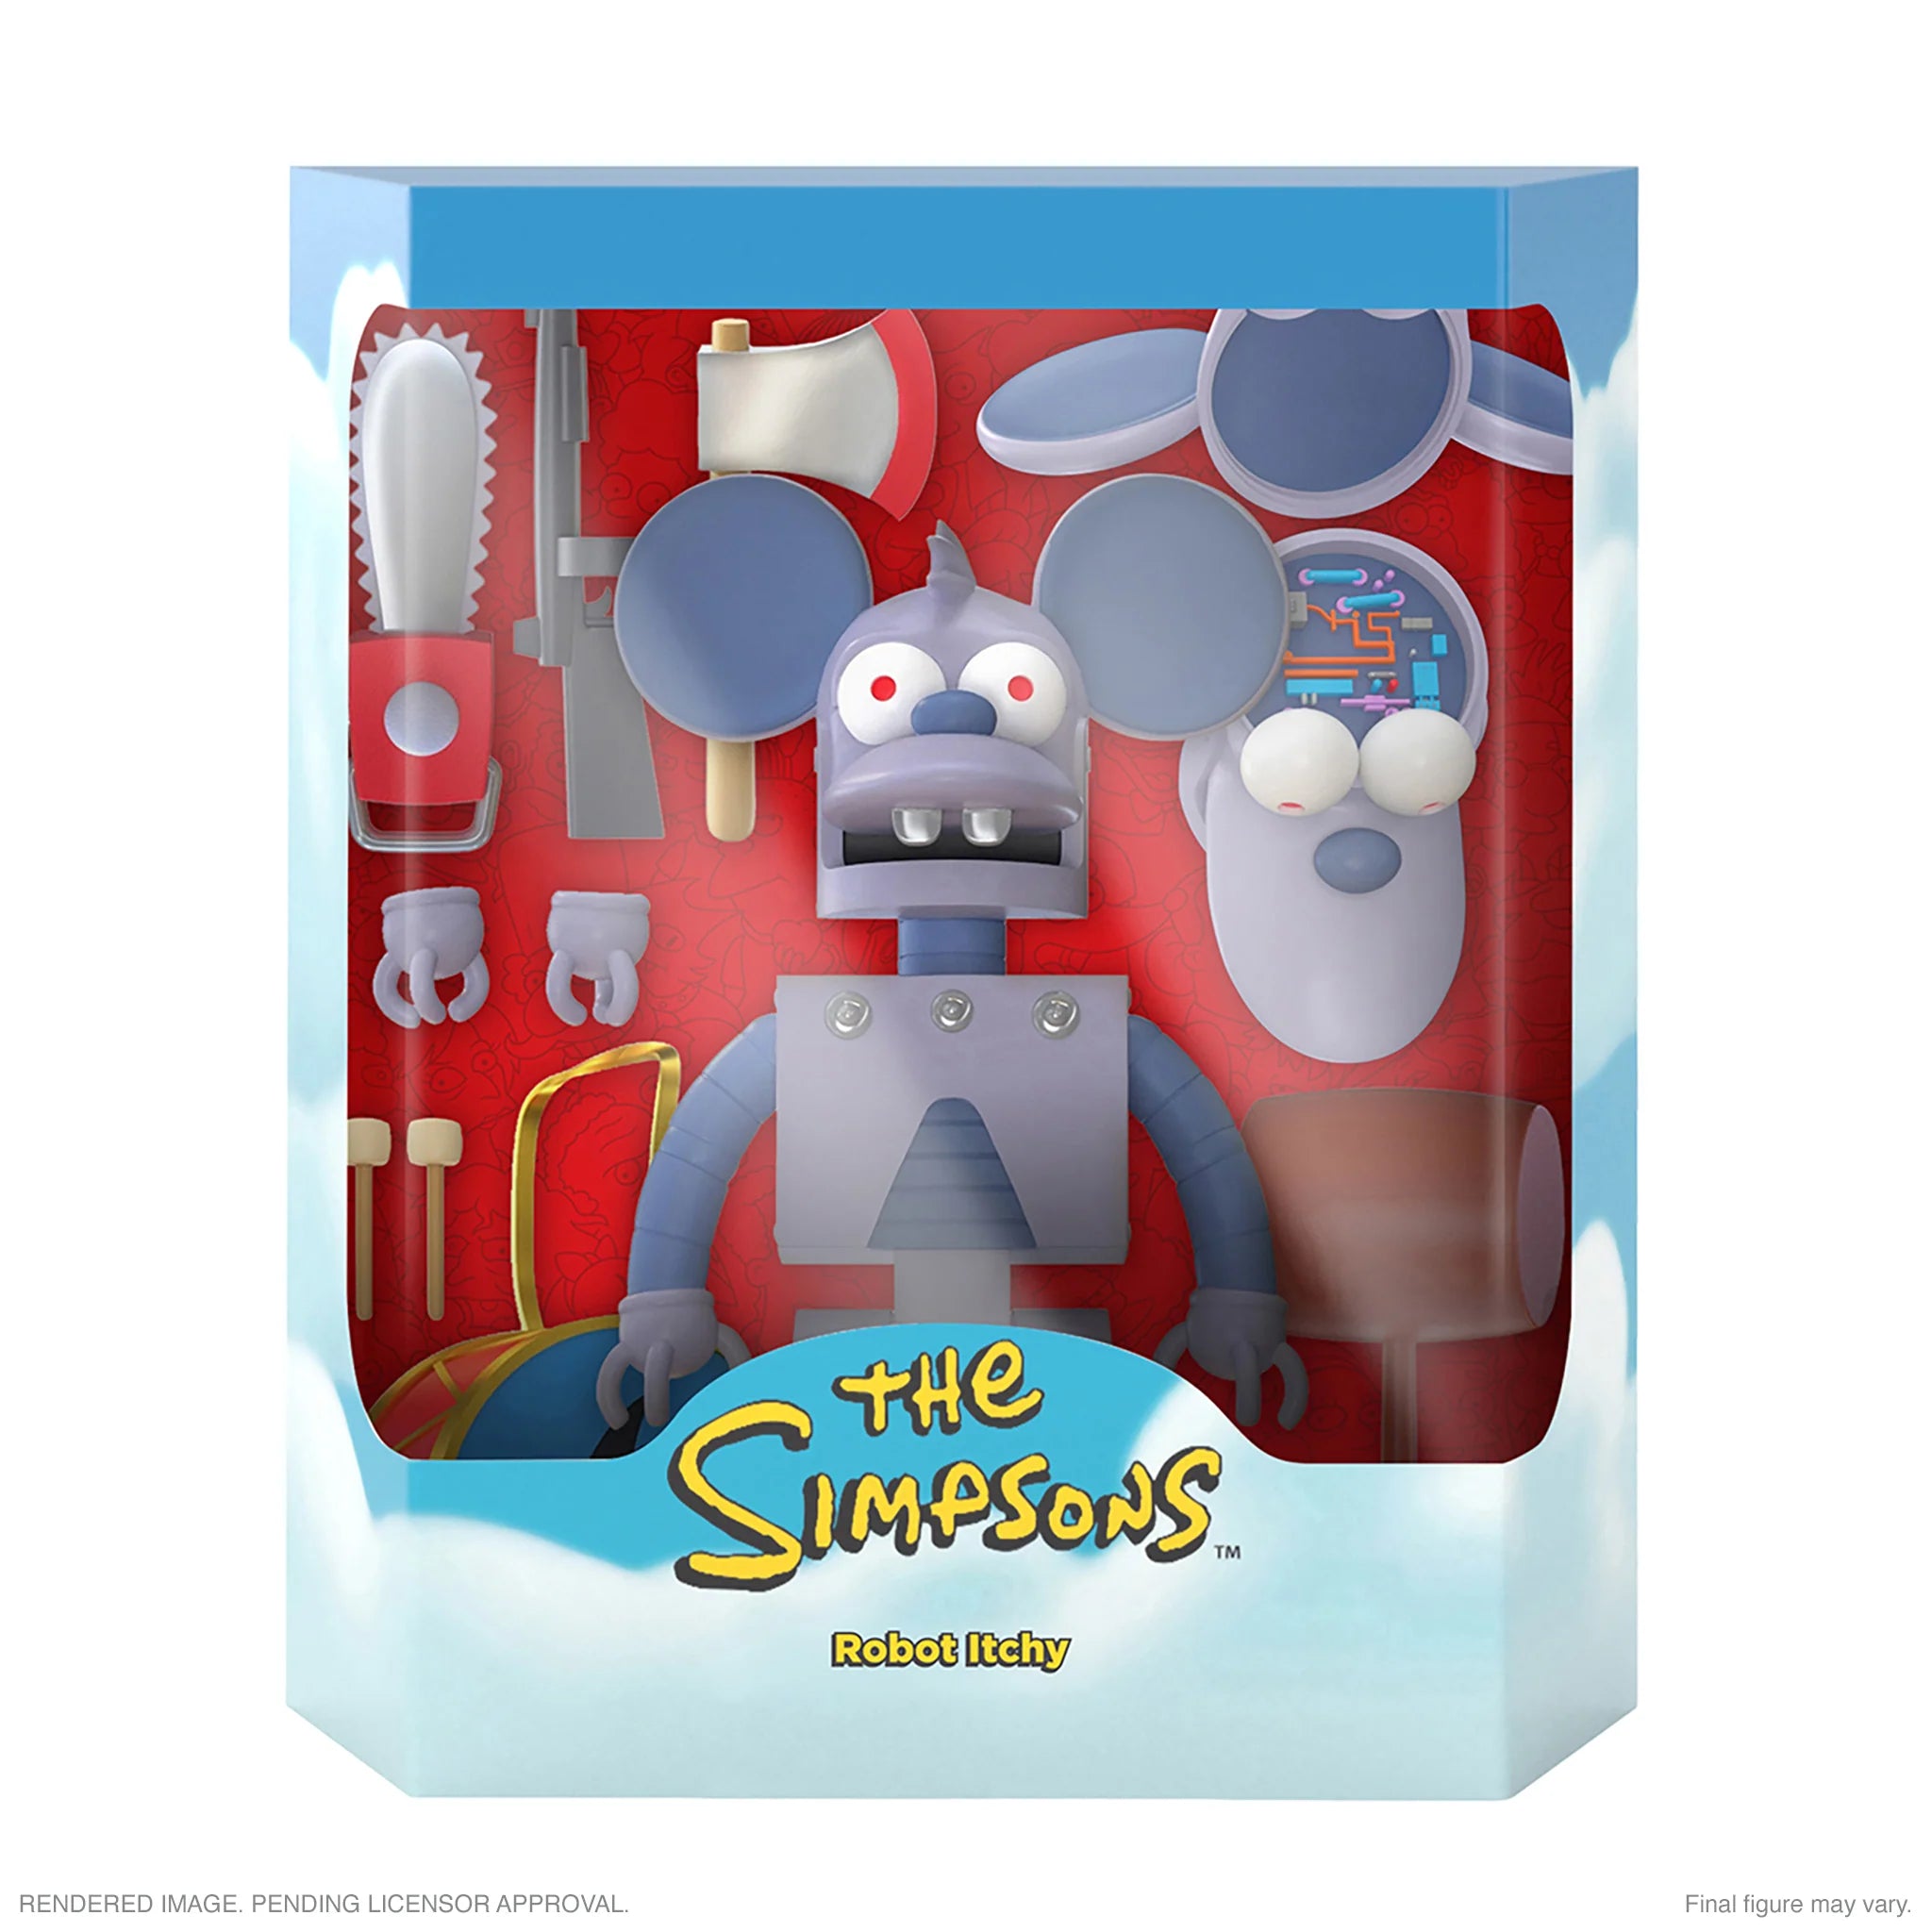 The Simpsons ULTIMATES! - Robot Itchy Figure